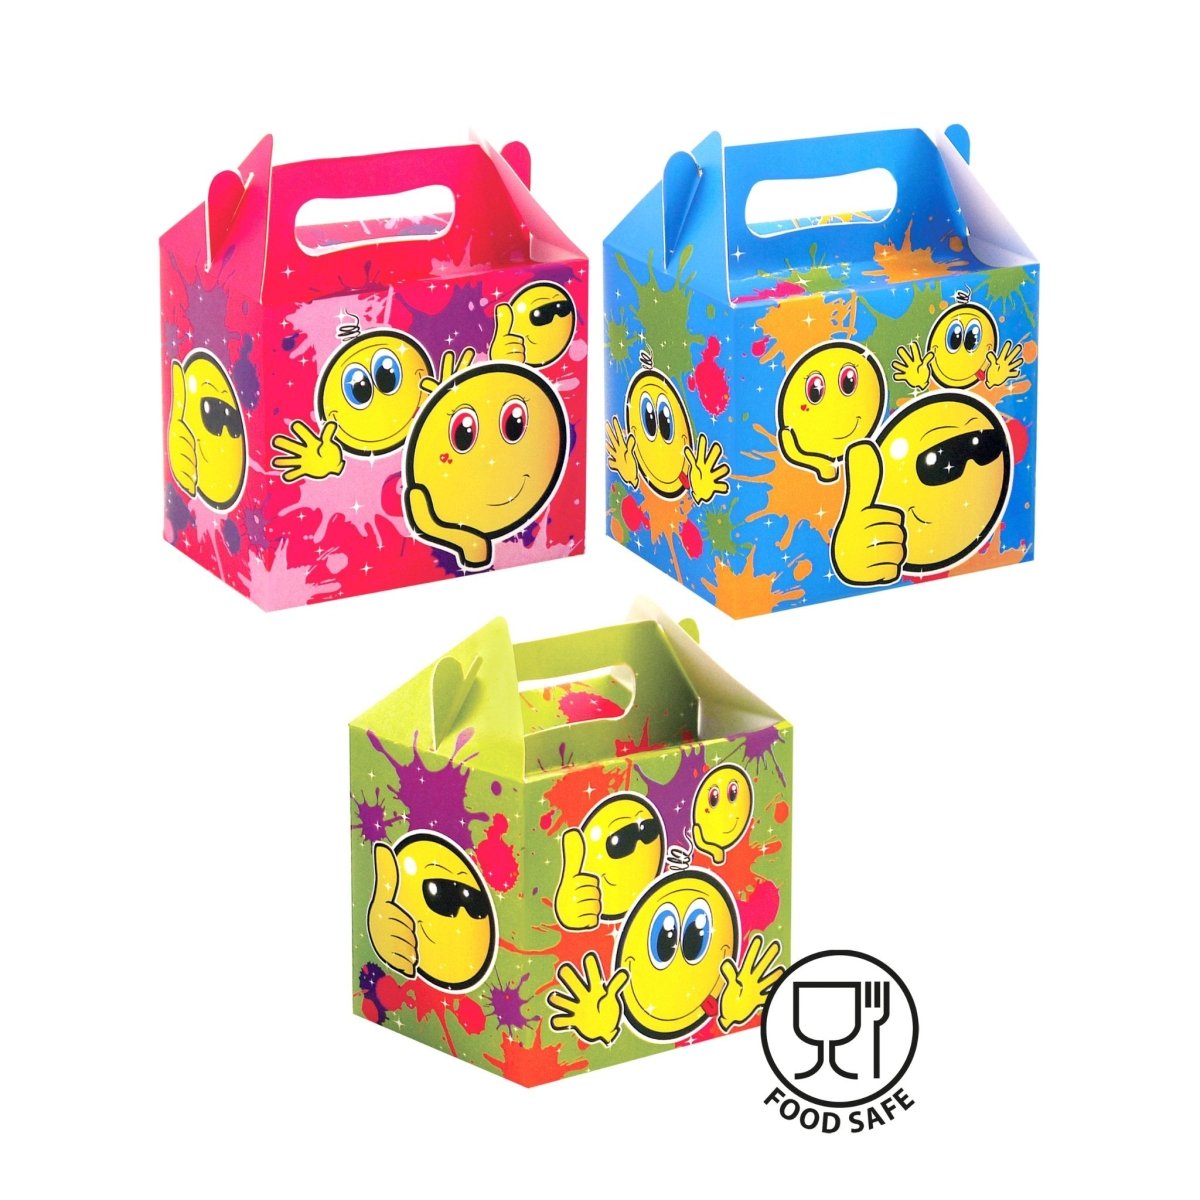 Smile Party Food Boxes - Kids Party Craft